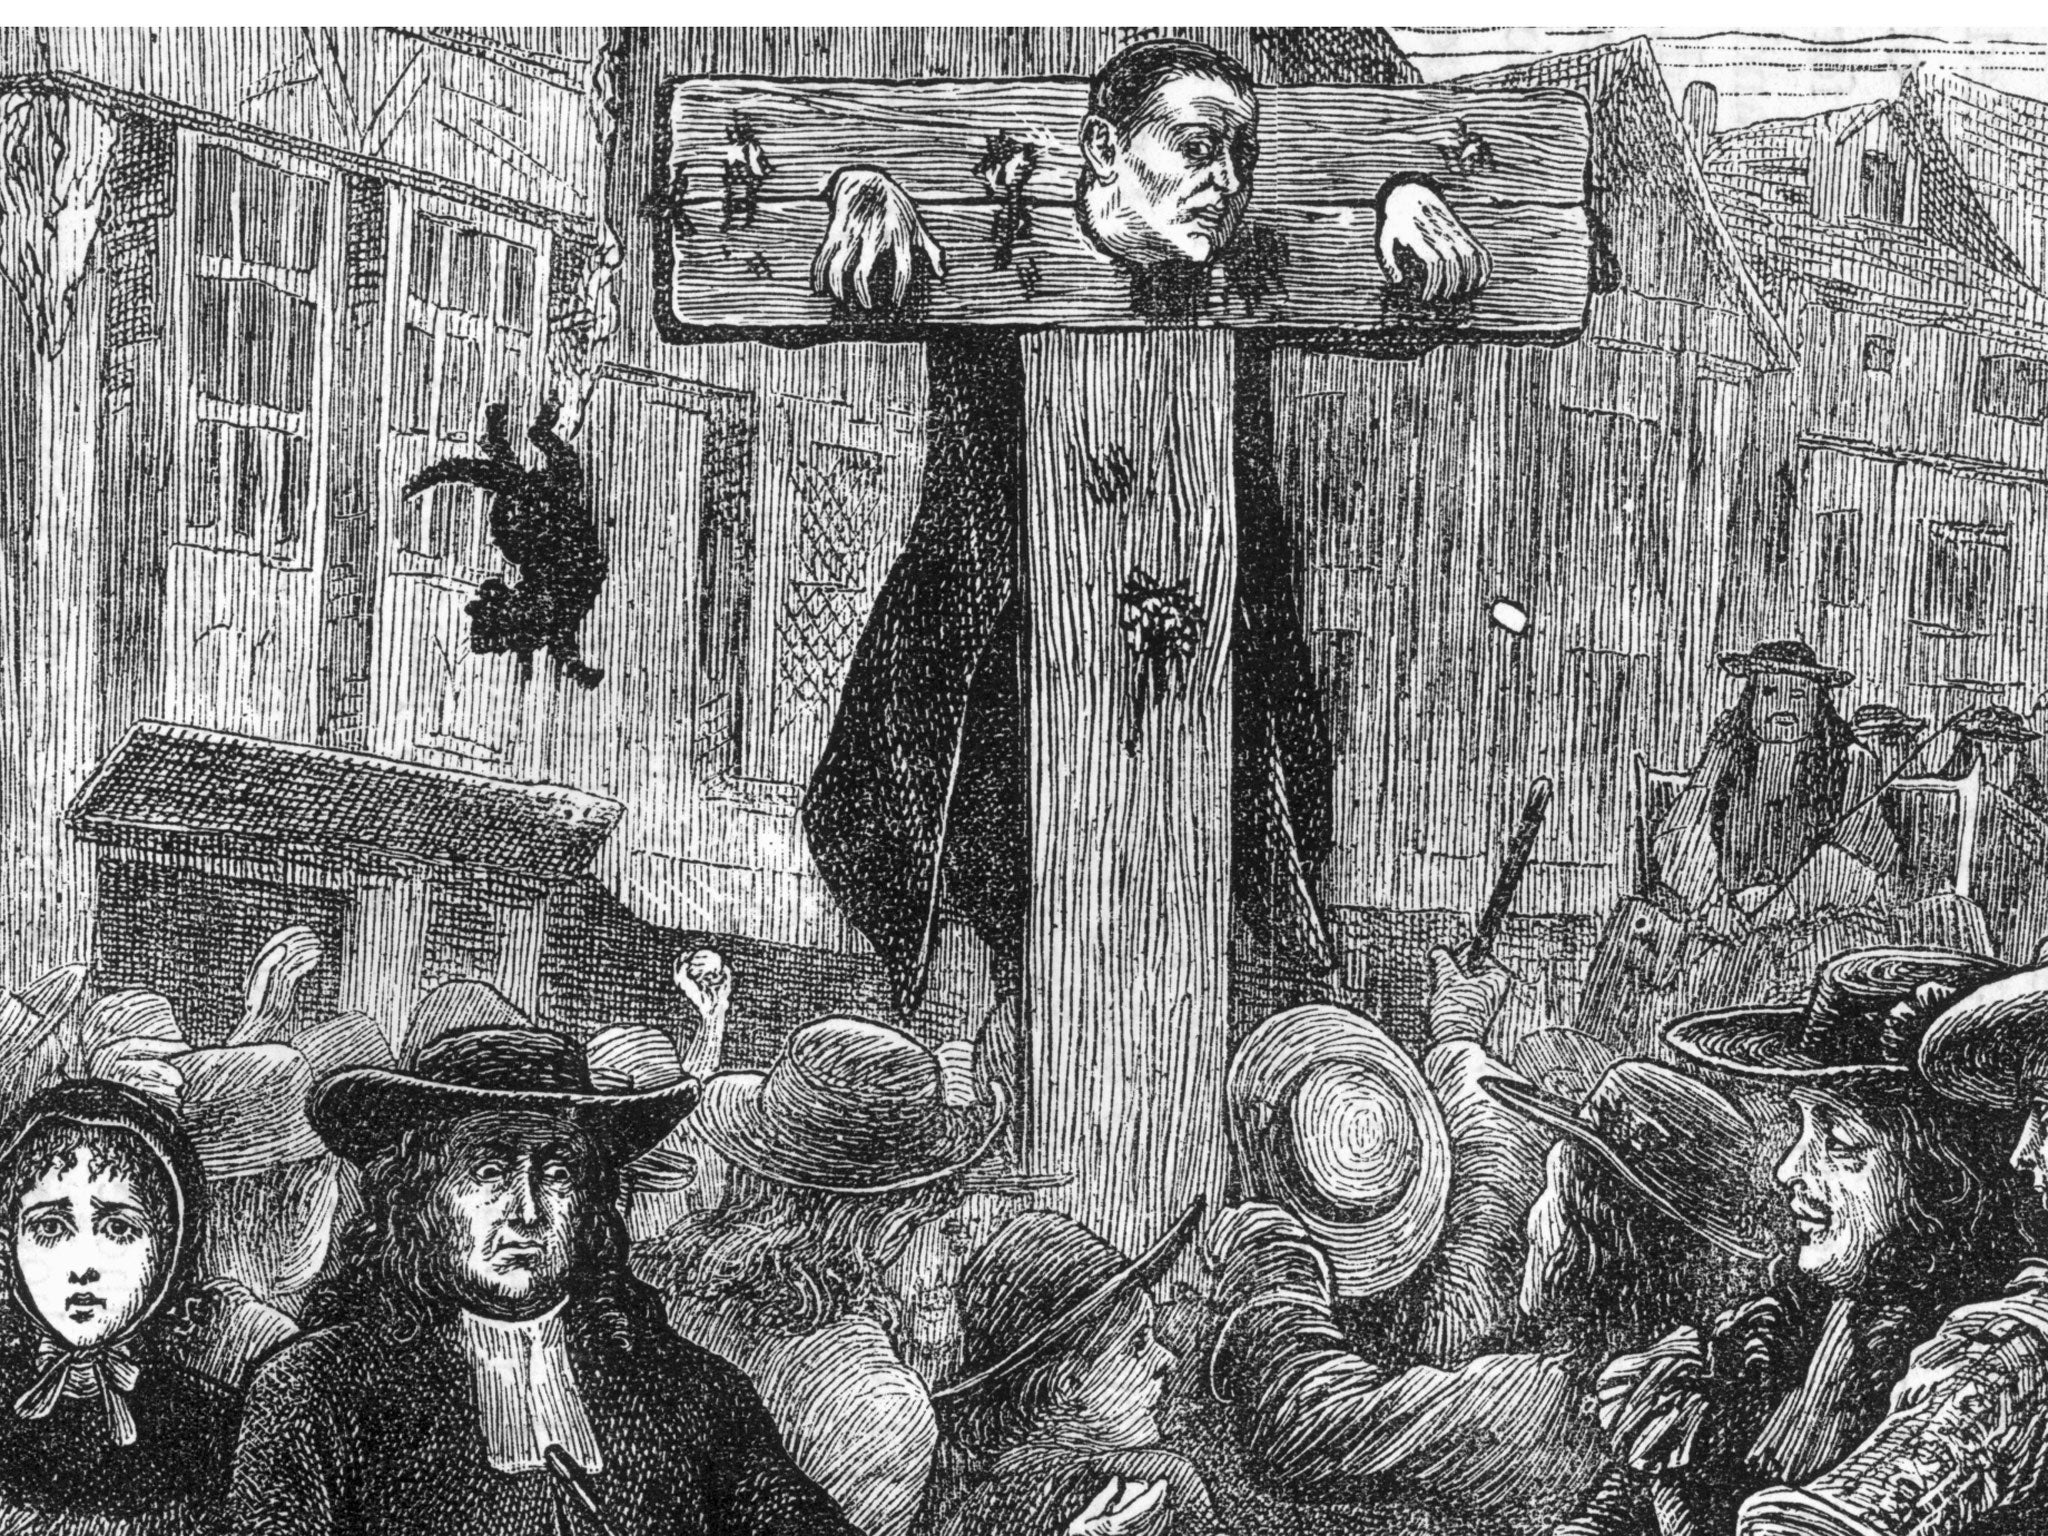 Circa 1685, English perjurer Doctor Titus Oates (1649 - 1705) in the pillory at the Temple gate for his involvement in the Popish Plot. Image dates from 1754.